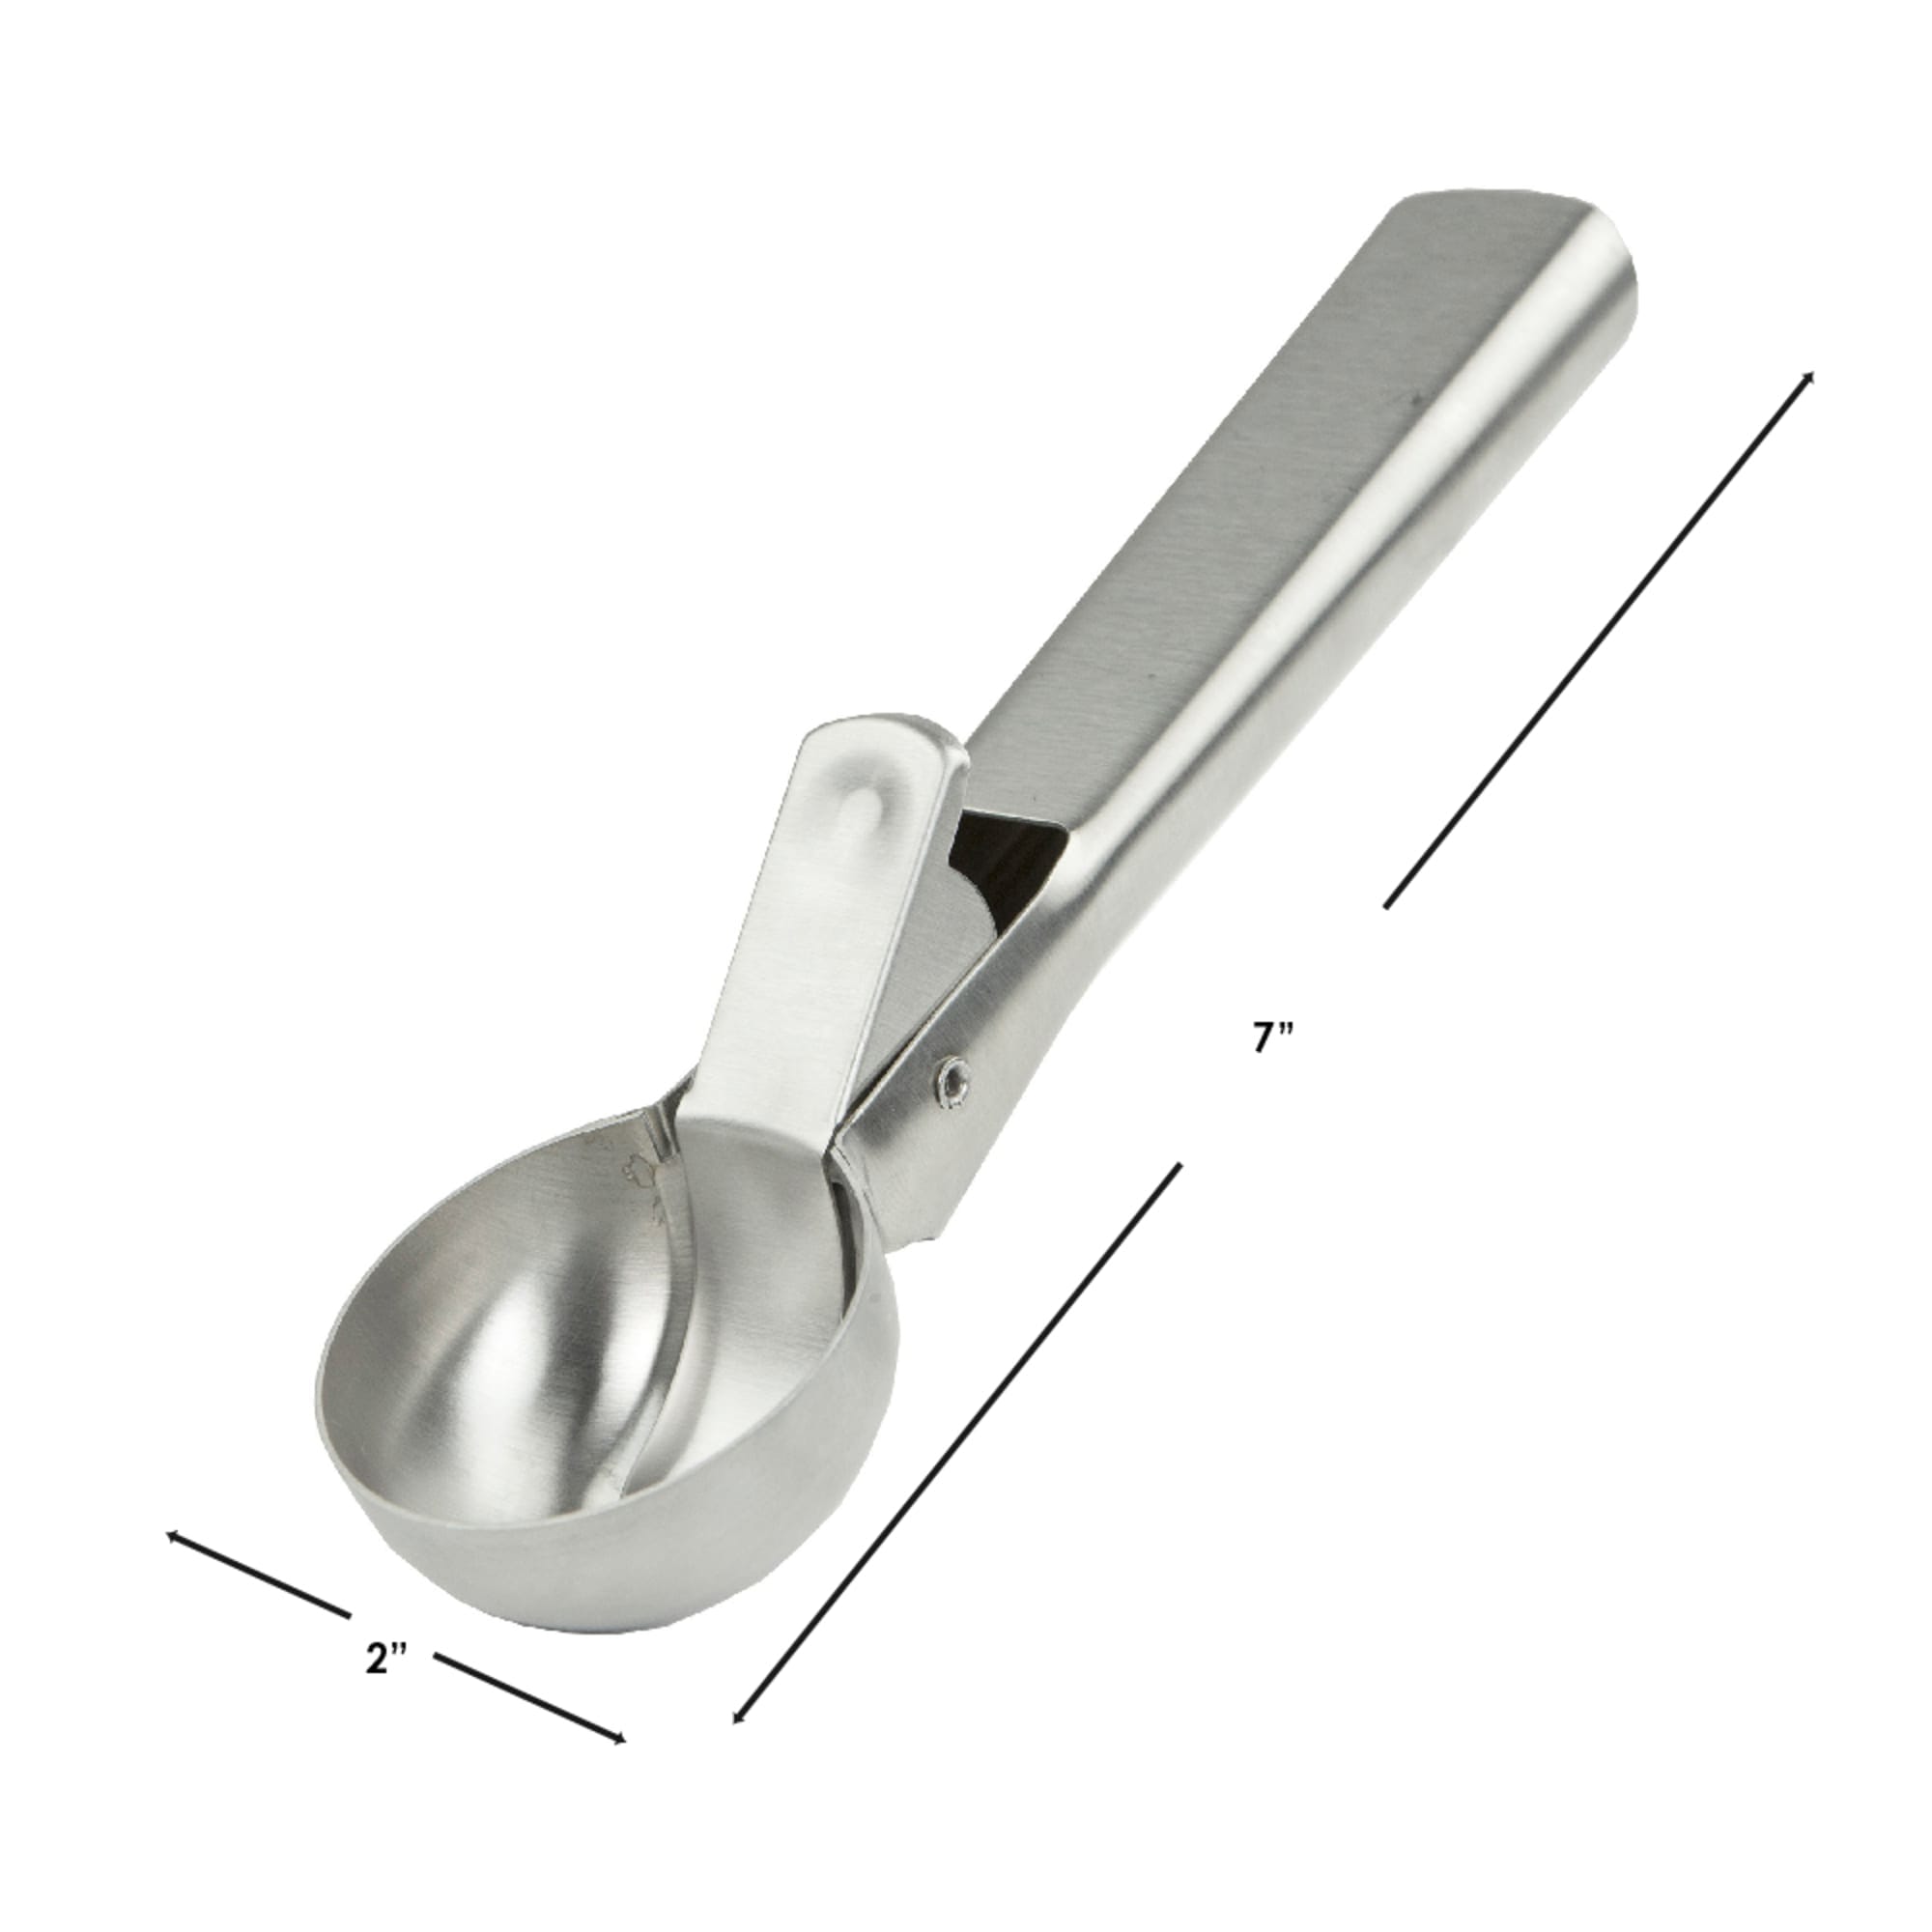 Home Basics Stainless Steel Ice Cream Scoop, Silver $3.00 EACH, CASE PACK OF 24